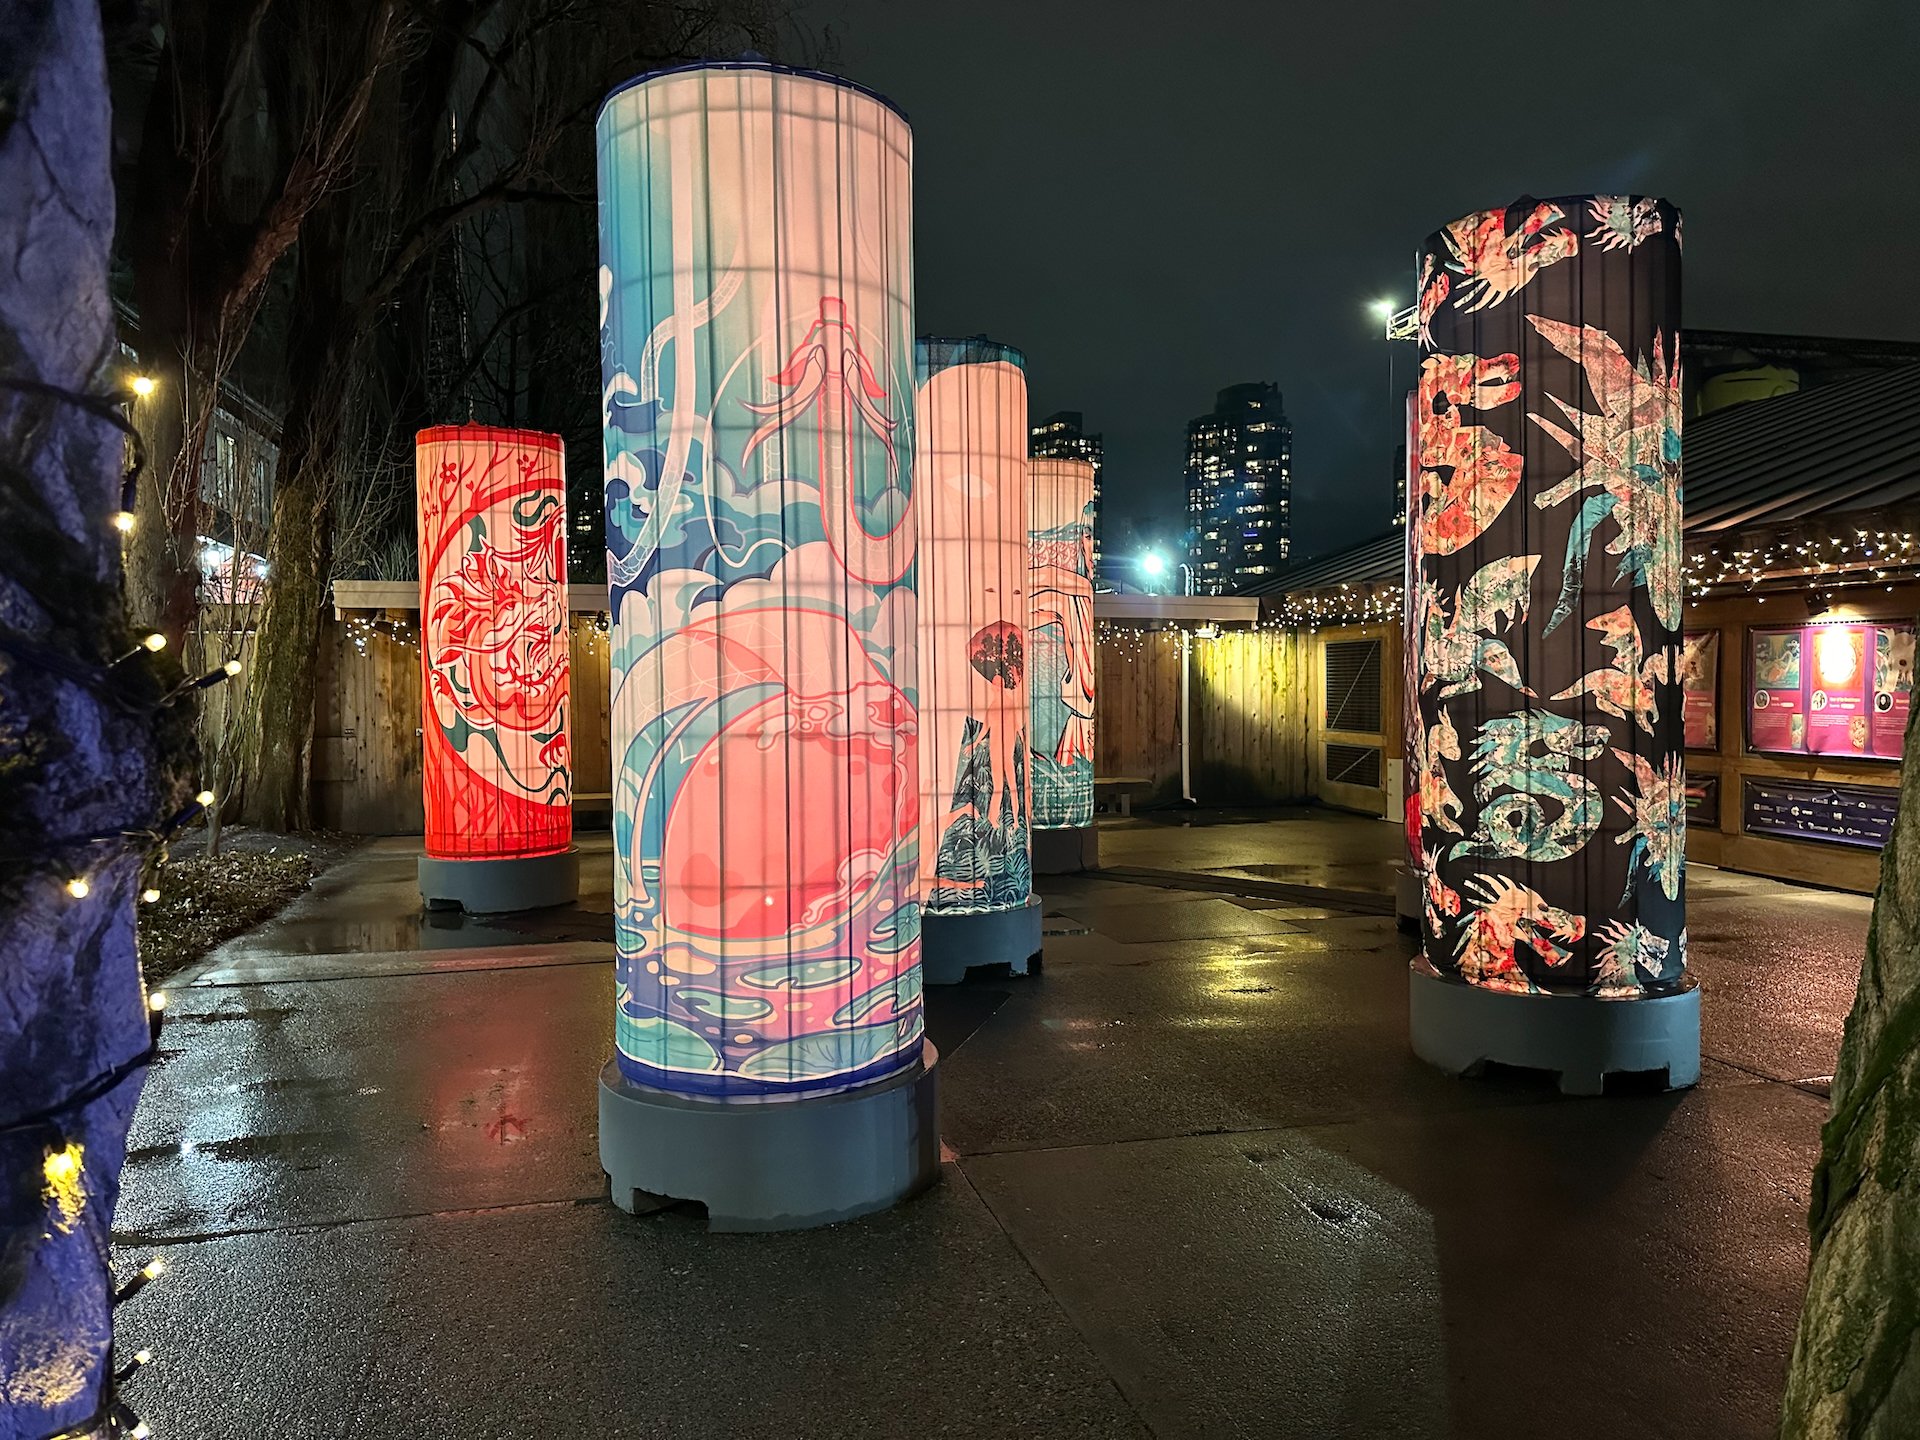  Some very cool displays up on Granville Island. We noticed them as we were out for a walk one night and took a few photos to share. 